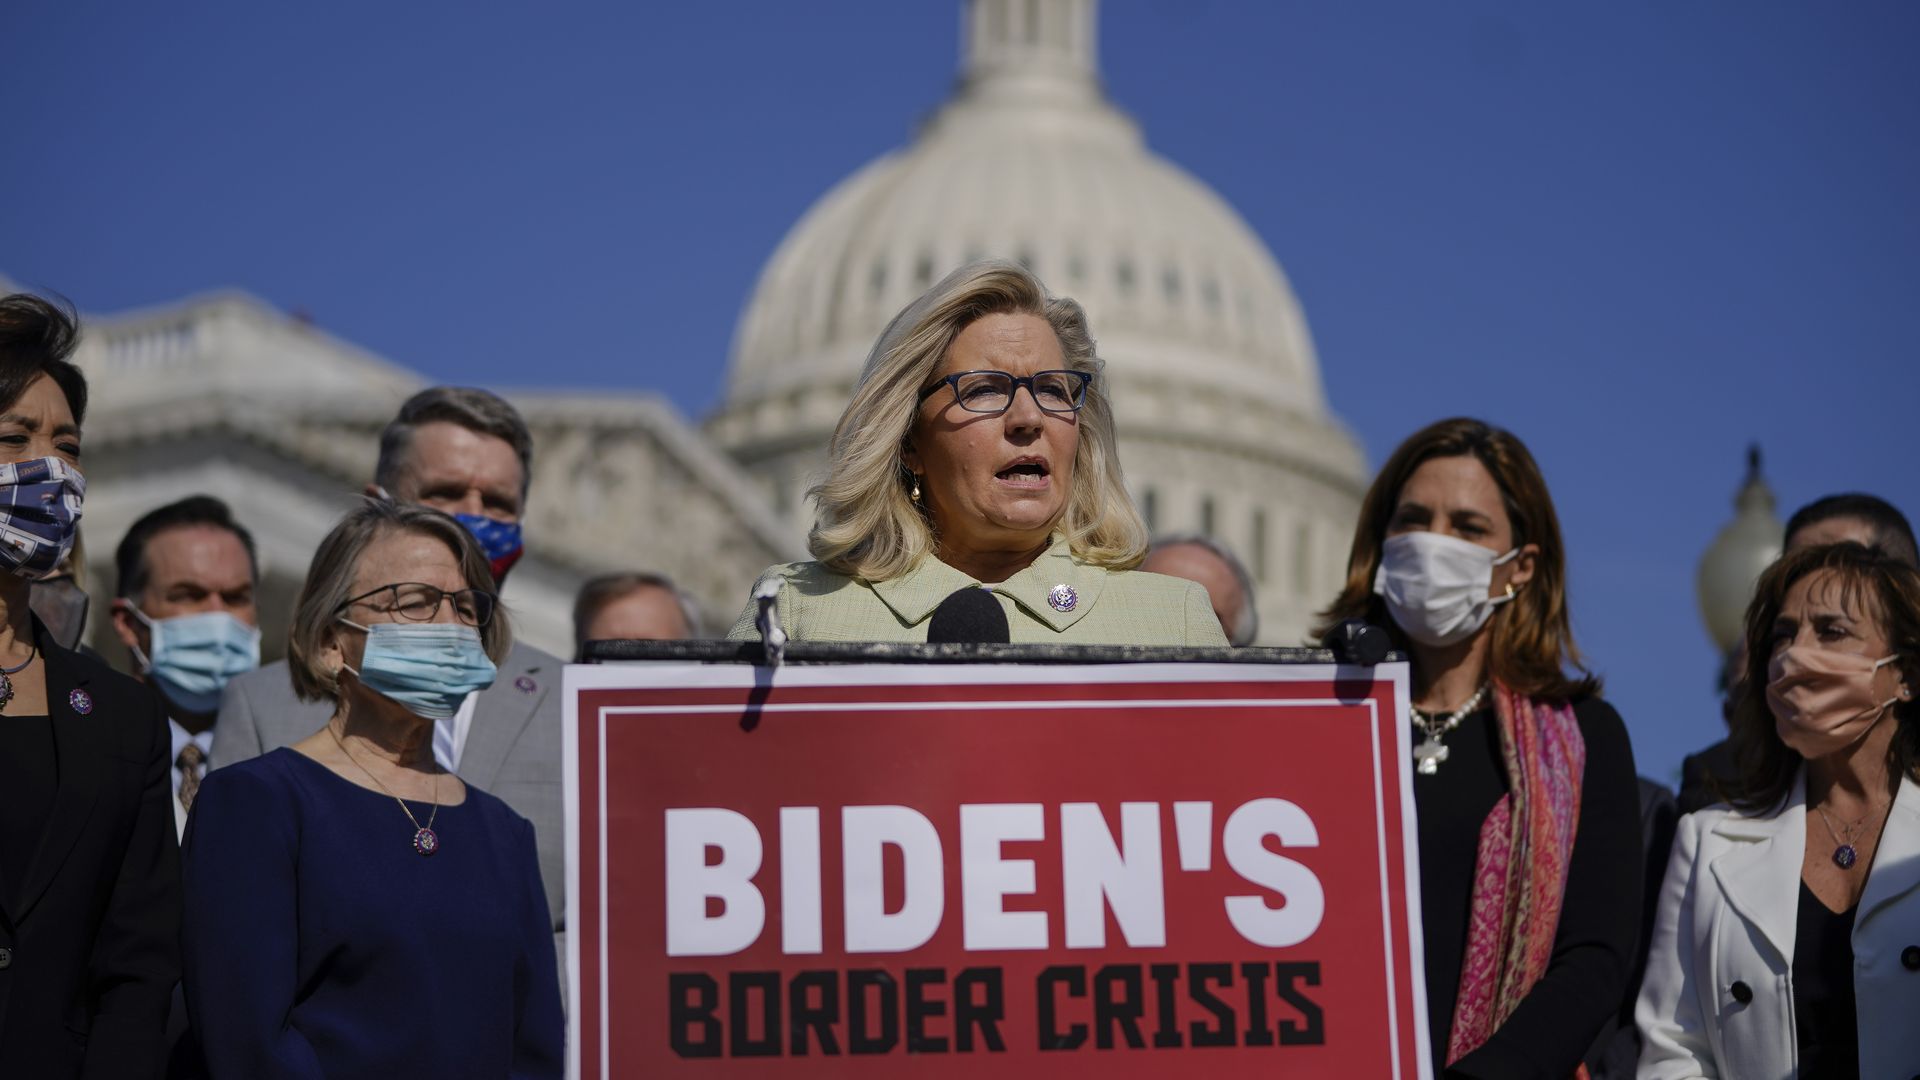 Rep. Liz Cheney is seen standing in front of the Capitol during a news conference focused on the southern border crisis.